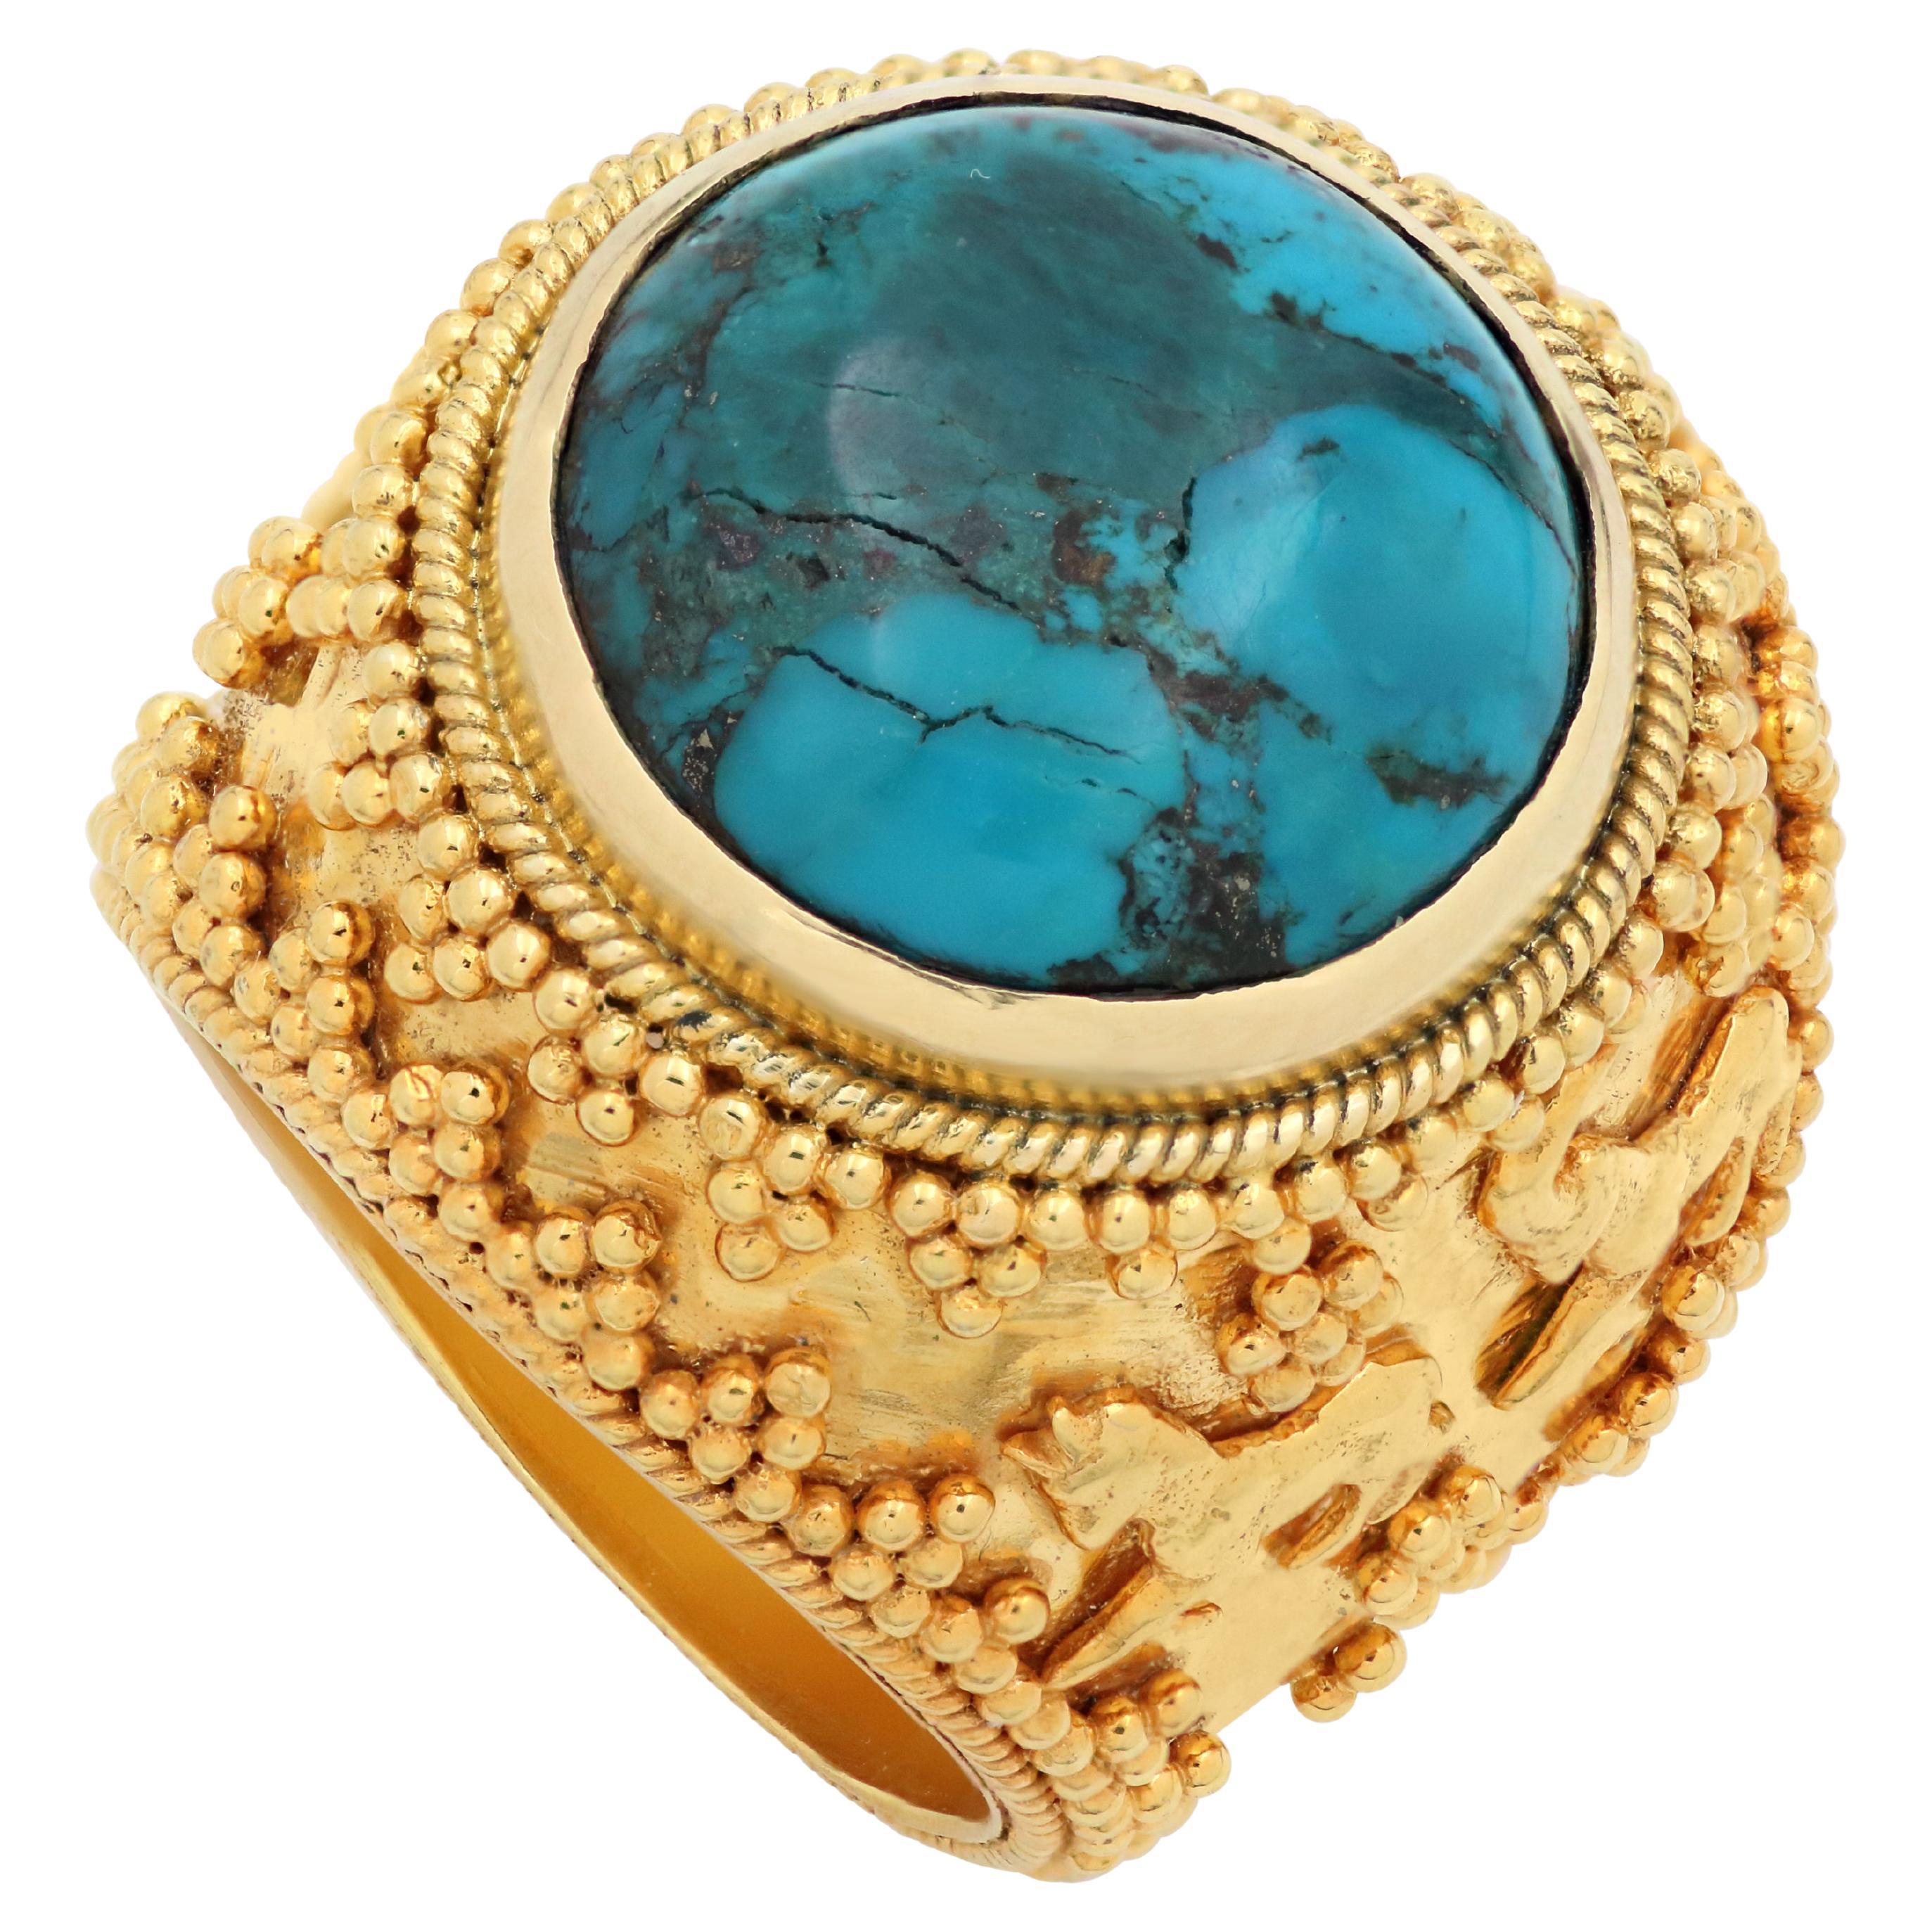 Dimos 18k Gold Turquoise Dome Ring with Kri Kri Goats For Sale